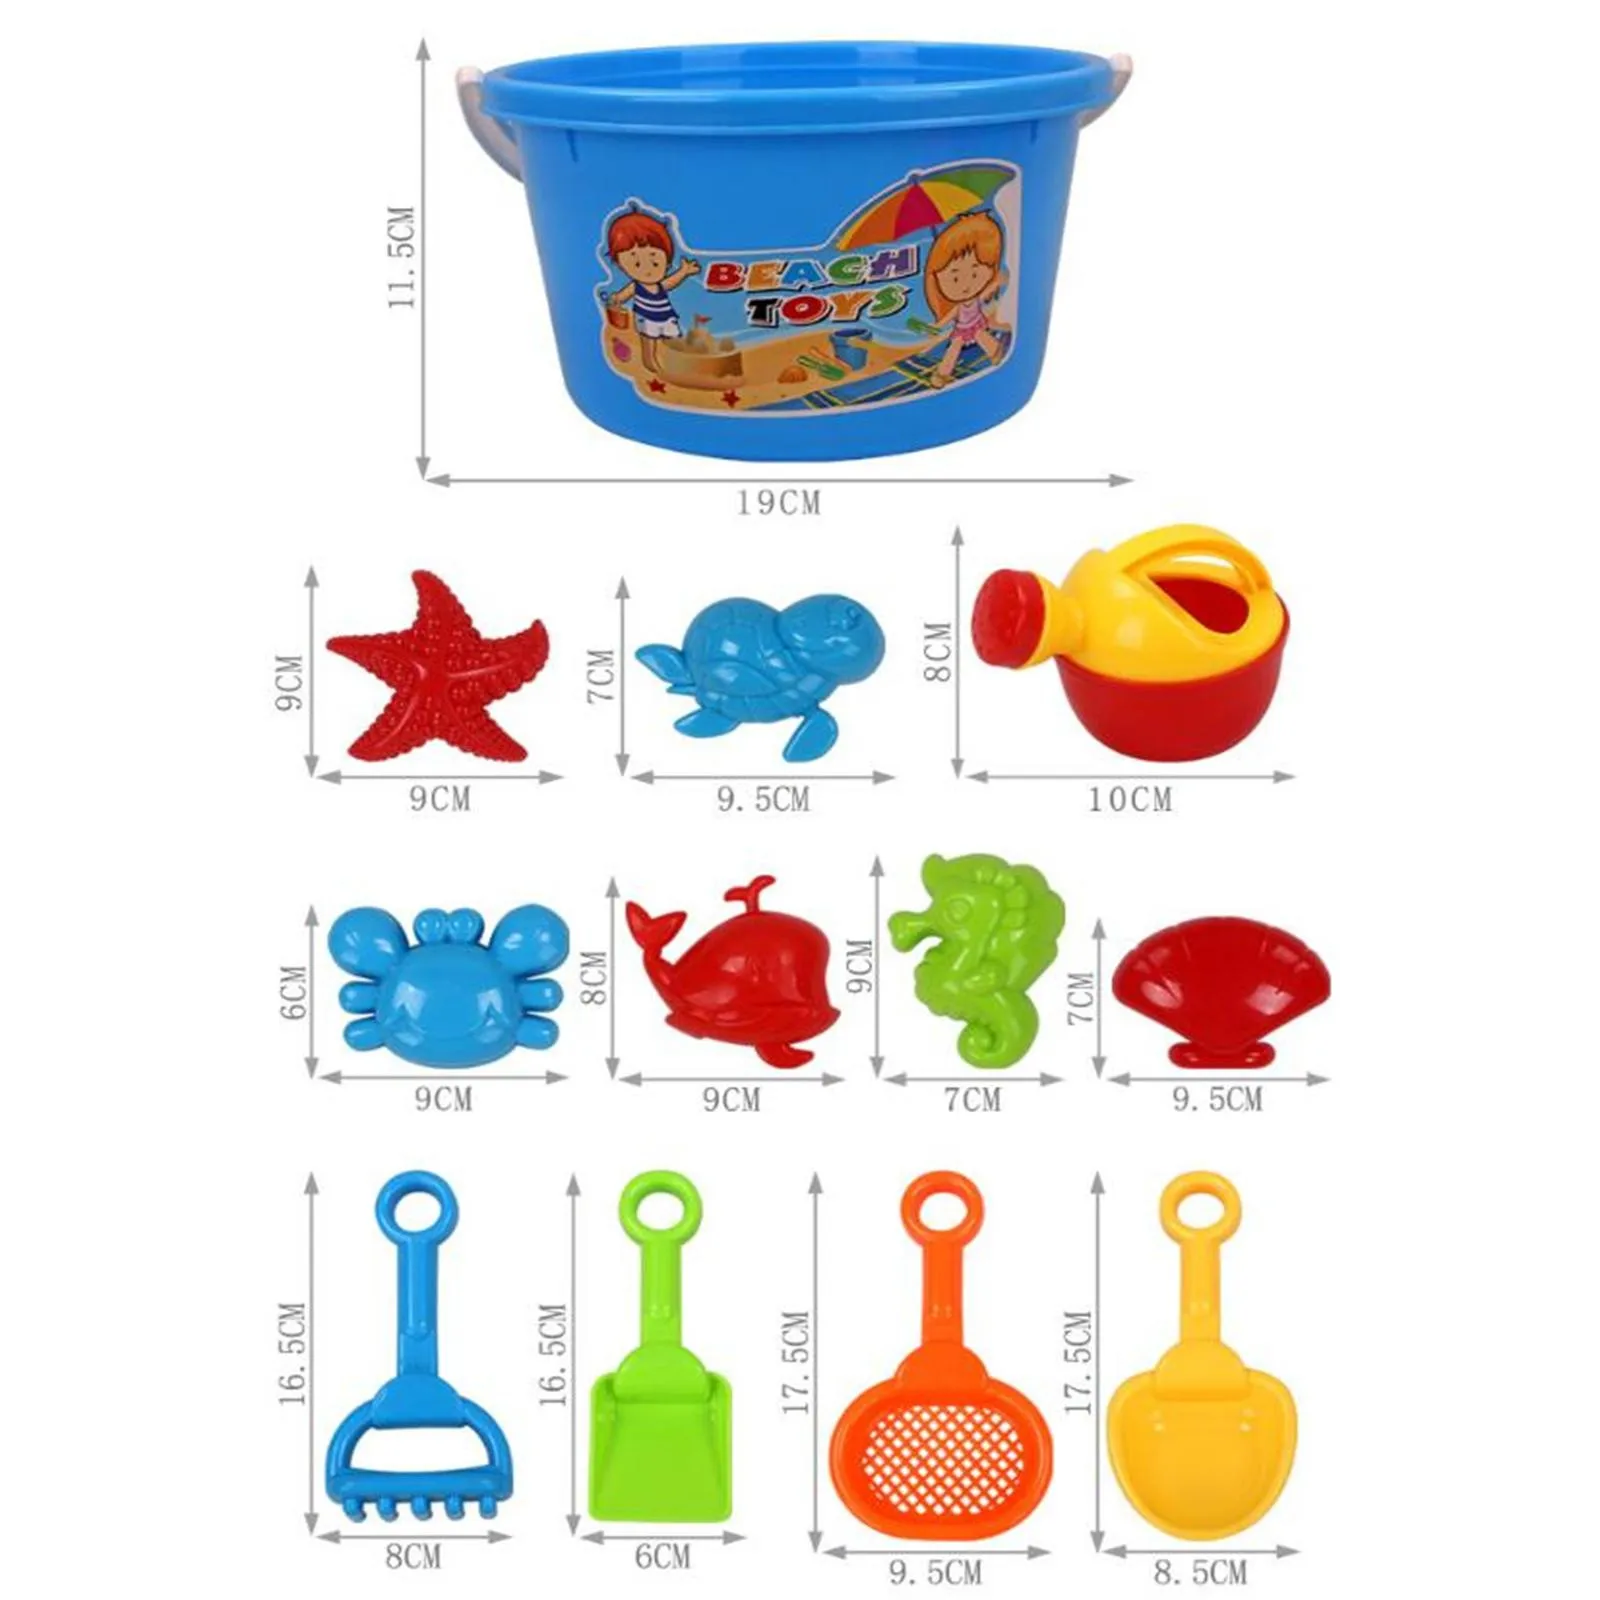 

Children Playing In Summer, Outdoor Playing In The Sand Beach Children'S Toy Set Castle Bucket Spade Shovel Rake Colourful Tool